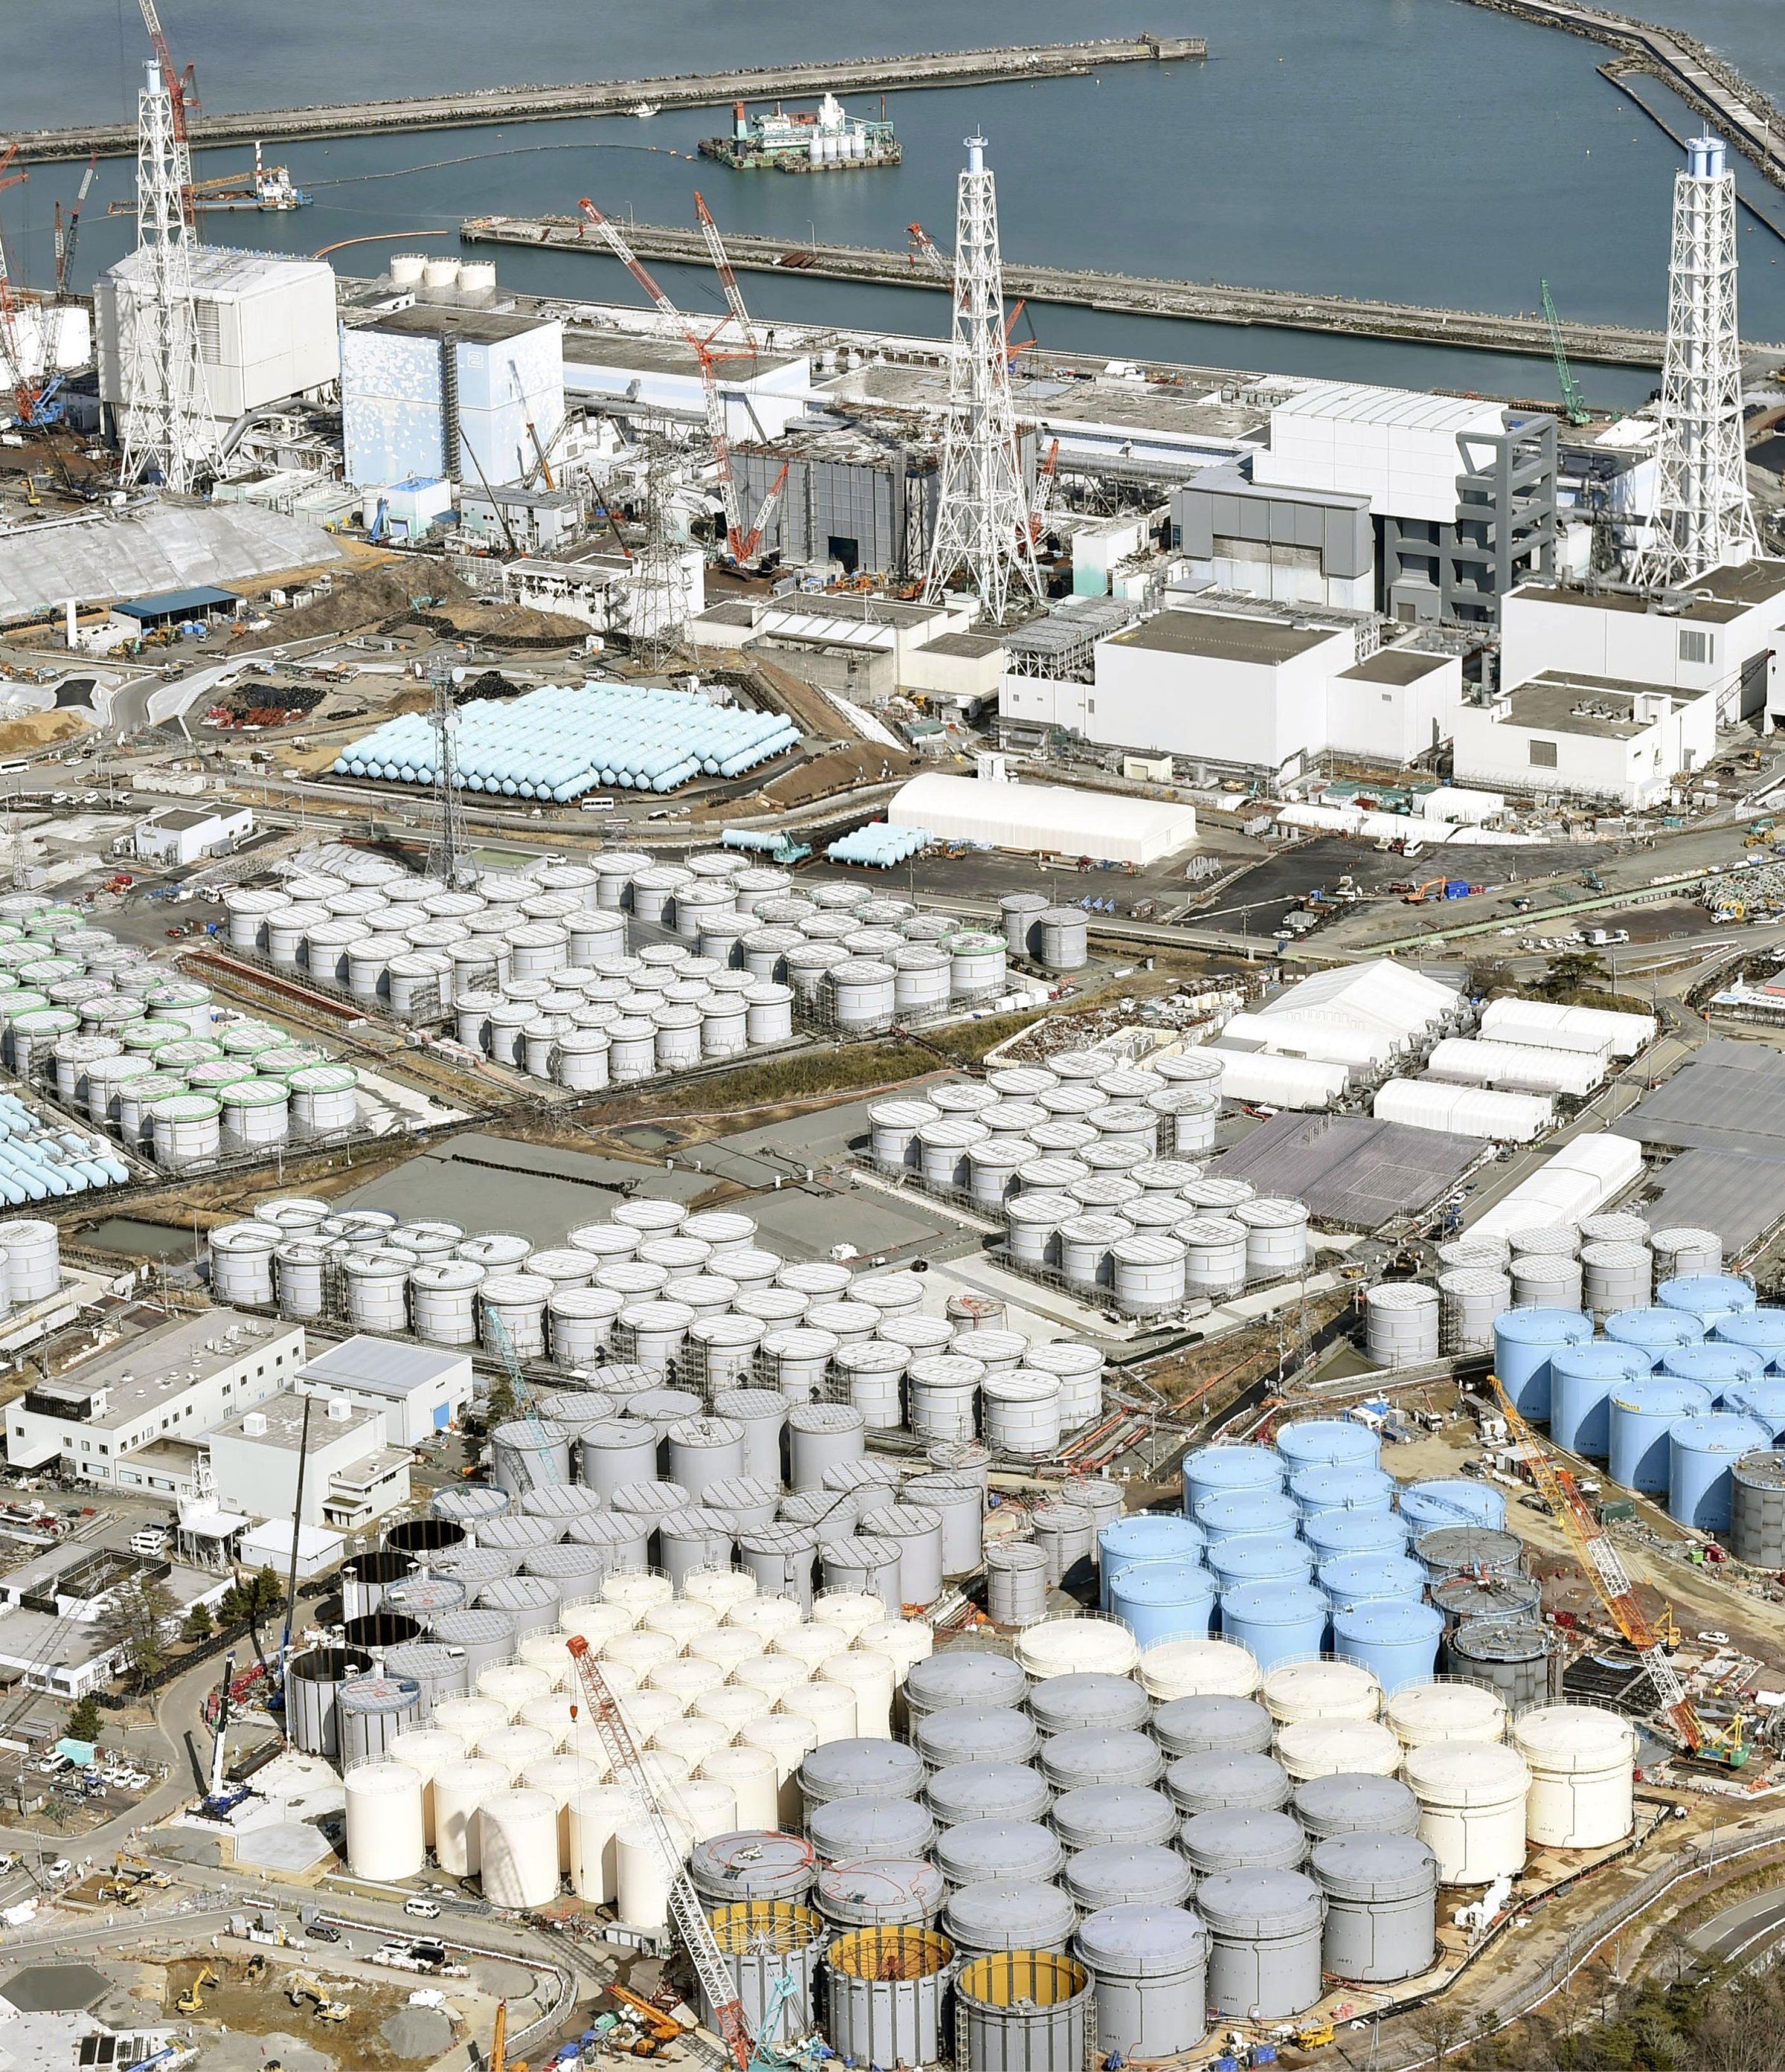 Tanks of radiation-contaminated water are seen at Tokyo Electric Power Co. (TEPCO)'s Fukushima Daiichi nuclear power plant in Fukushima, Japan on March 11, 2015.